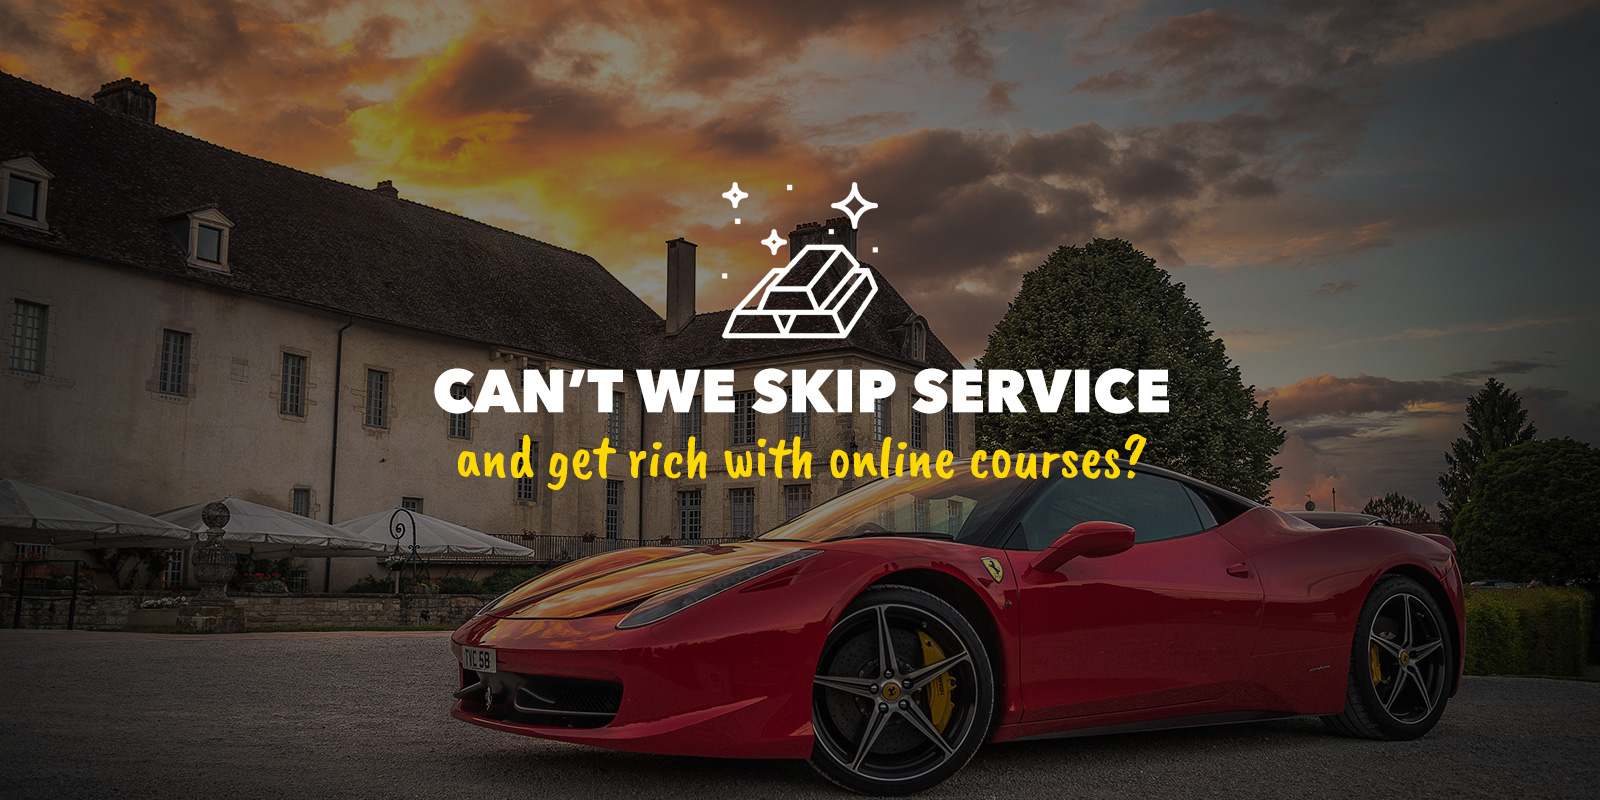 can't we skip service and get rich with online courses?